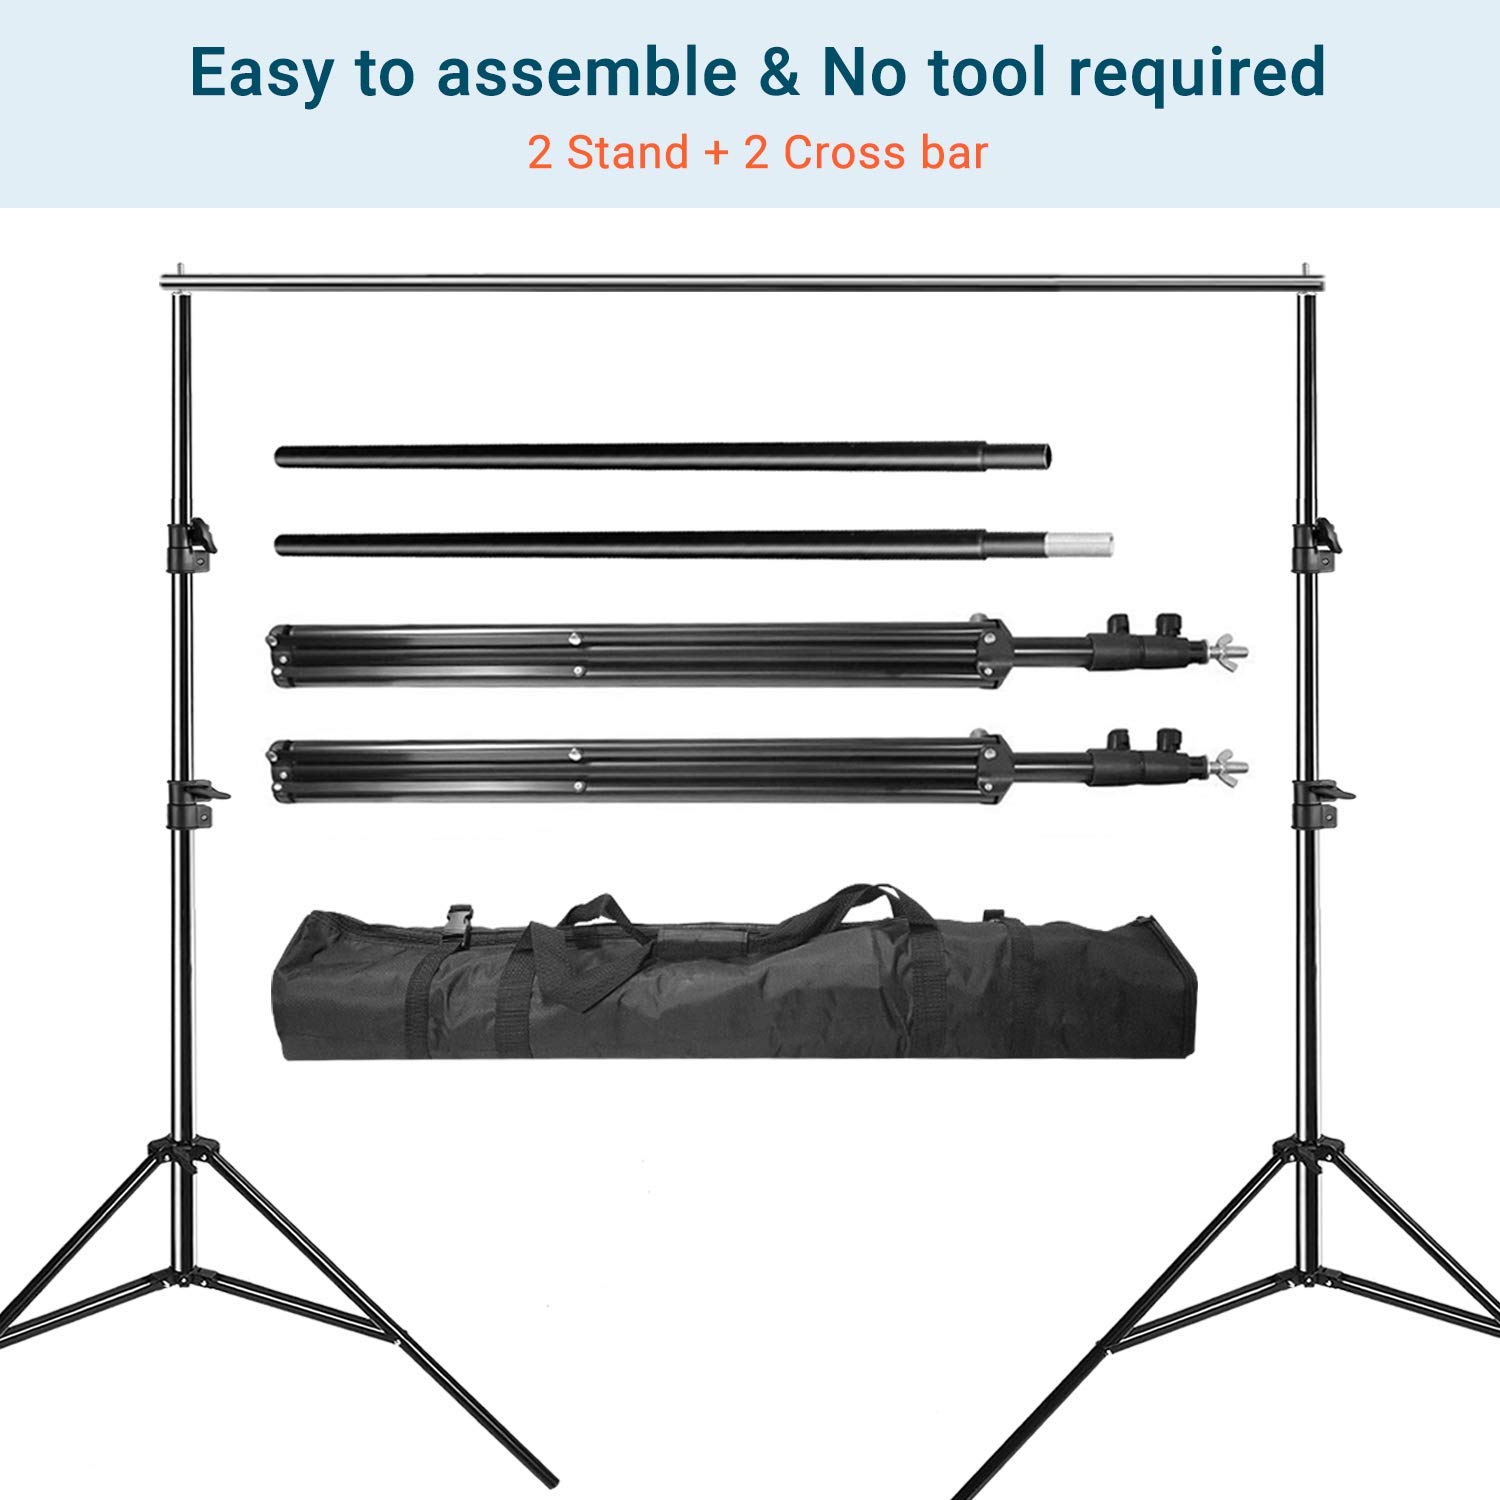 LS Photography 10 Feet Wide Photography Photo Muslin Background Support Stand Backdrop Crossbar Kit, Backdrop Support Stand with Carry Bag, WMT1143 - image 2 of 6